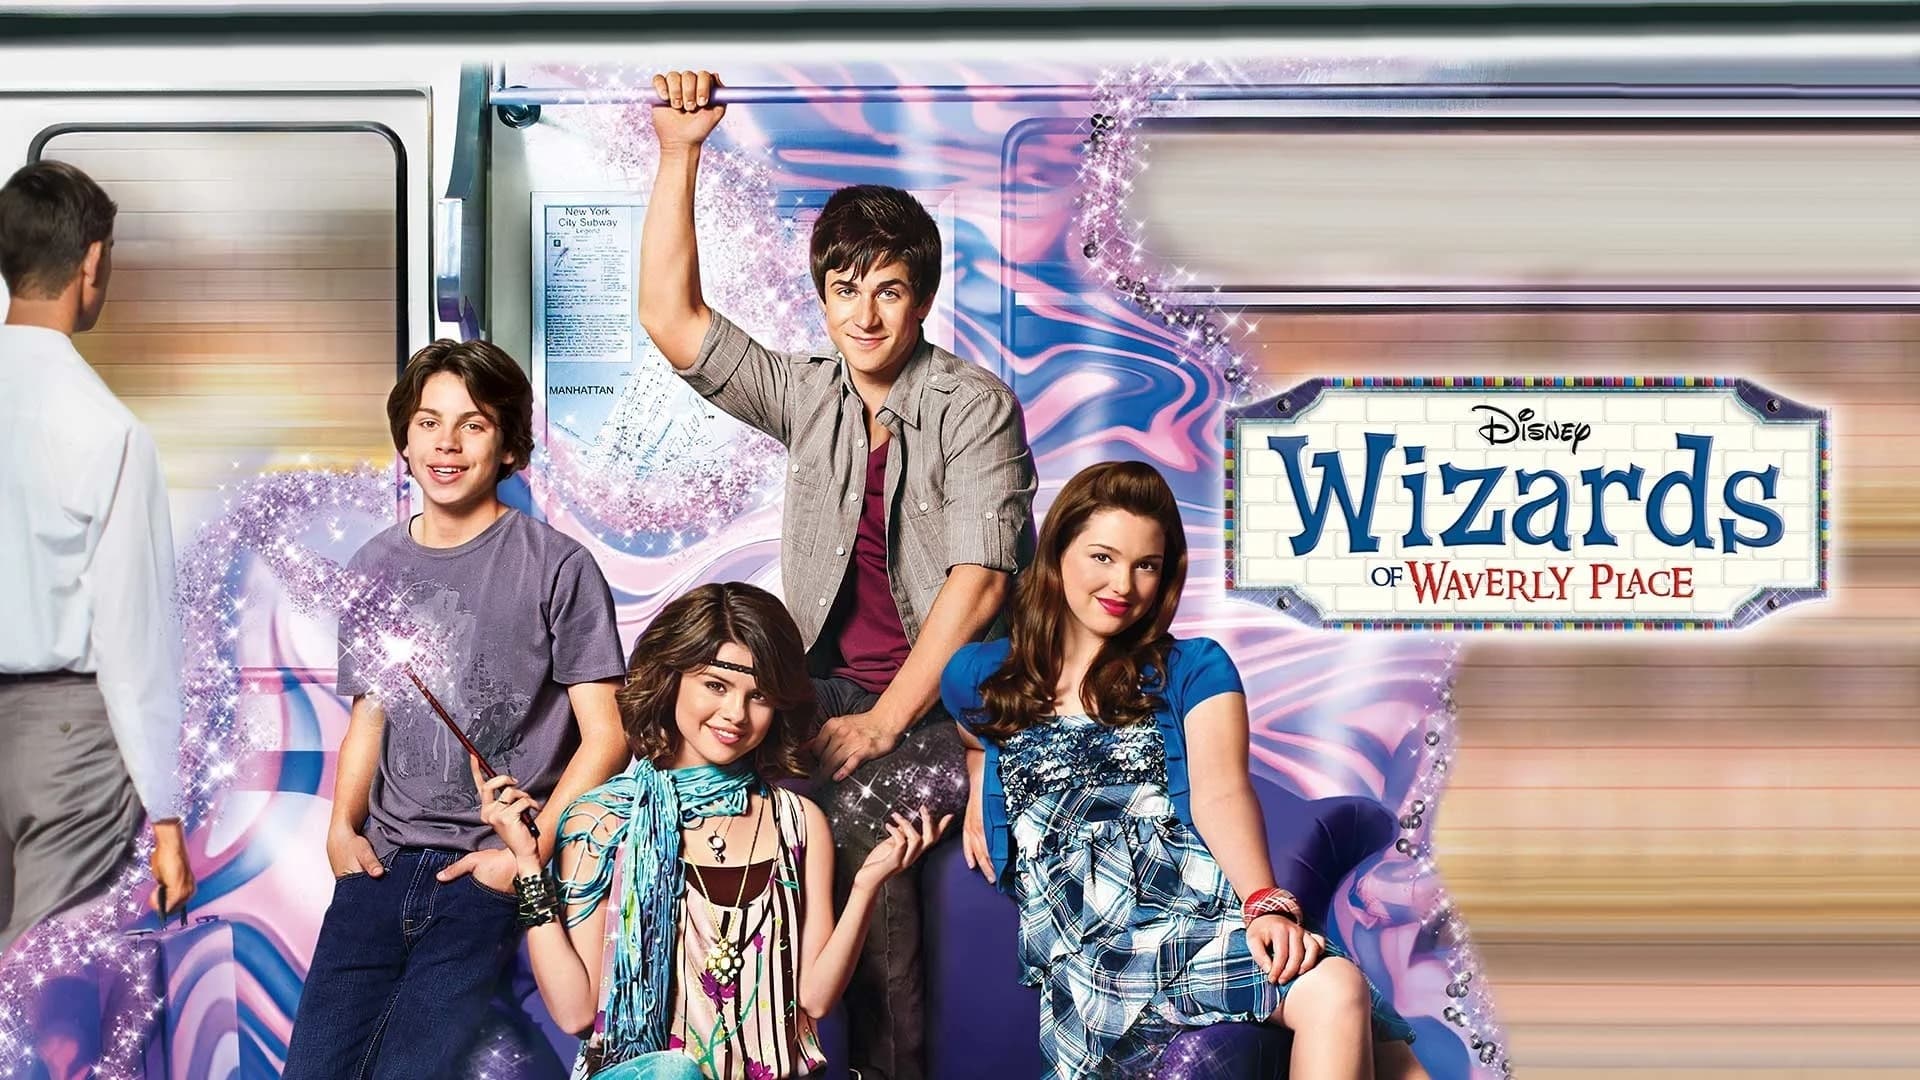 Watch Wizards of Waverly Place Full TV Series Online in HD Quality.